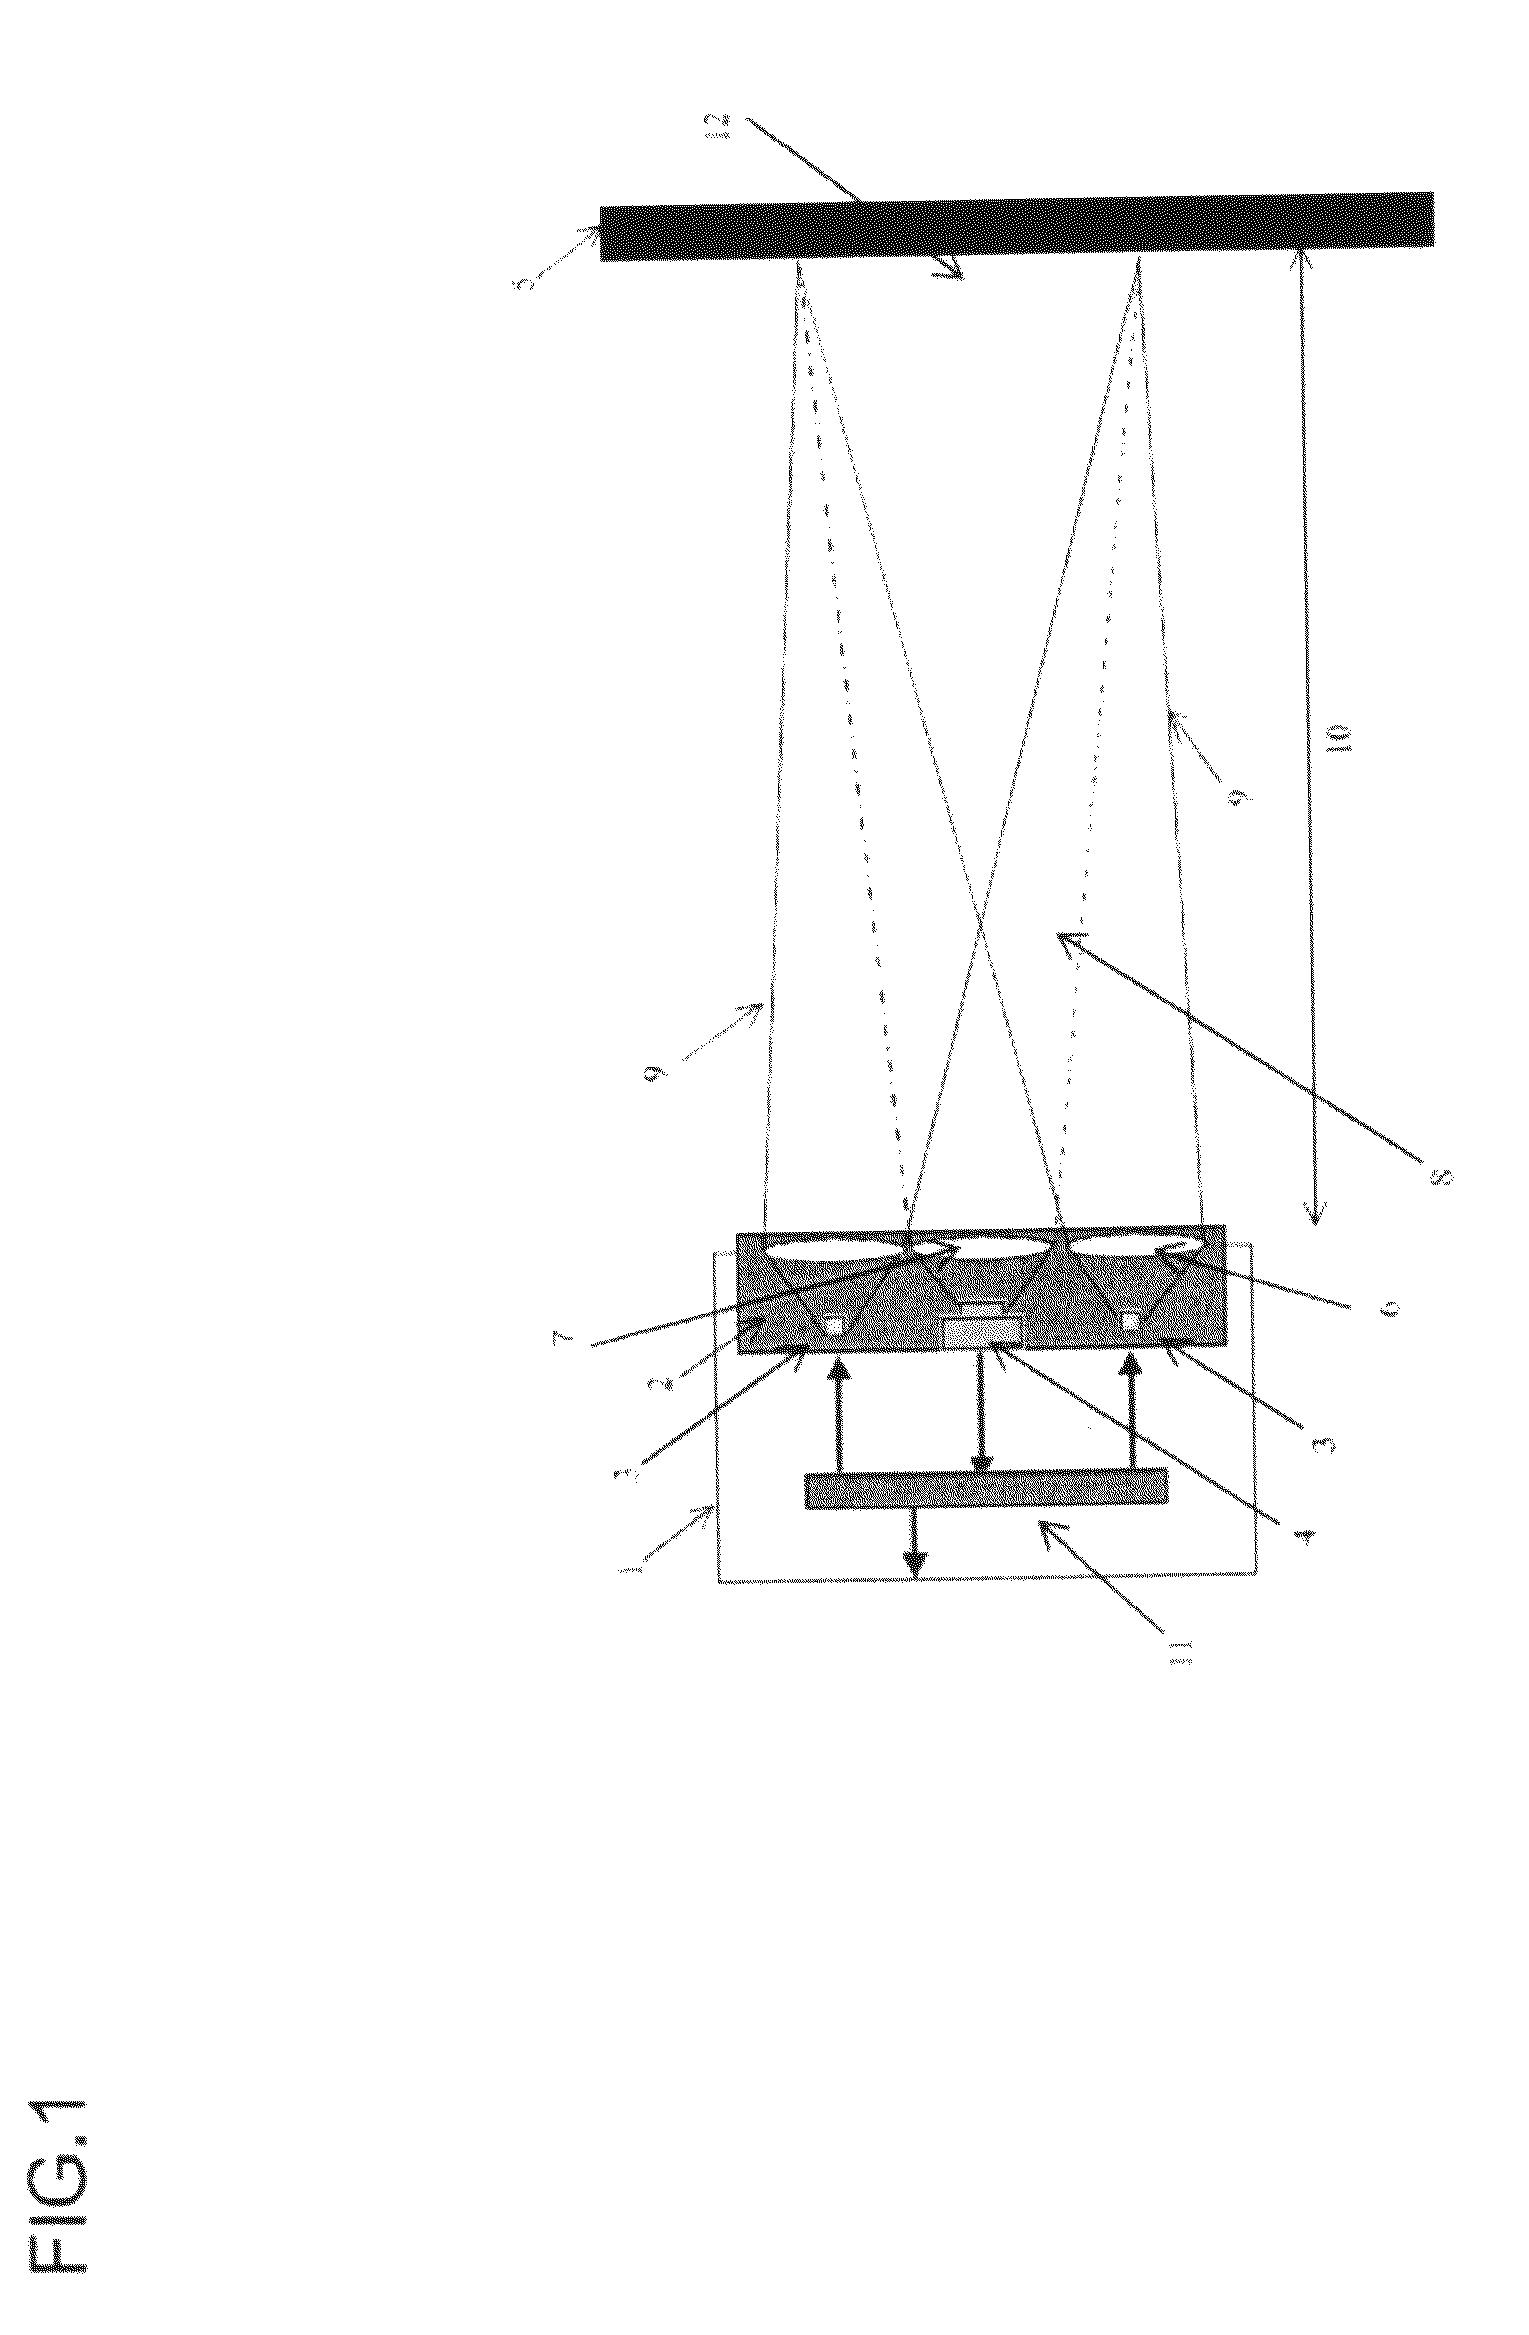 Optical device for motor vehicles, for detecting the condition of the road surface